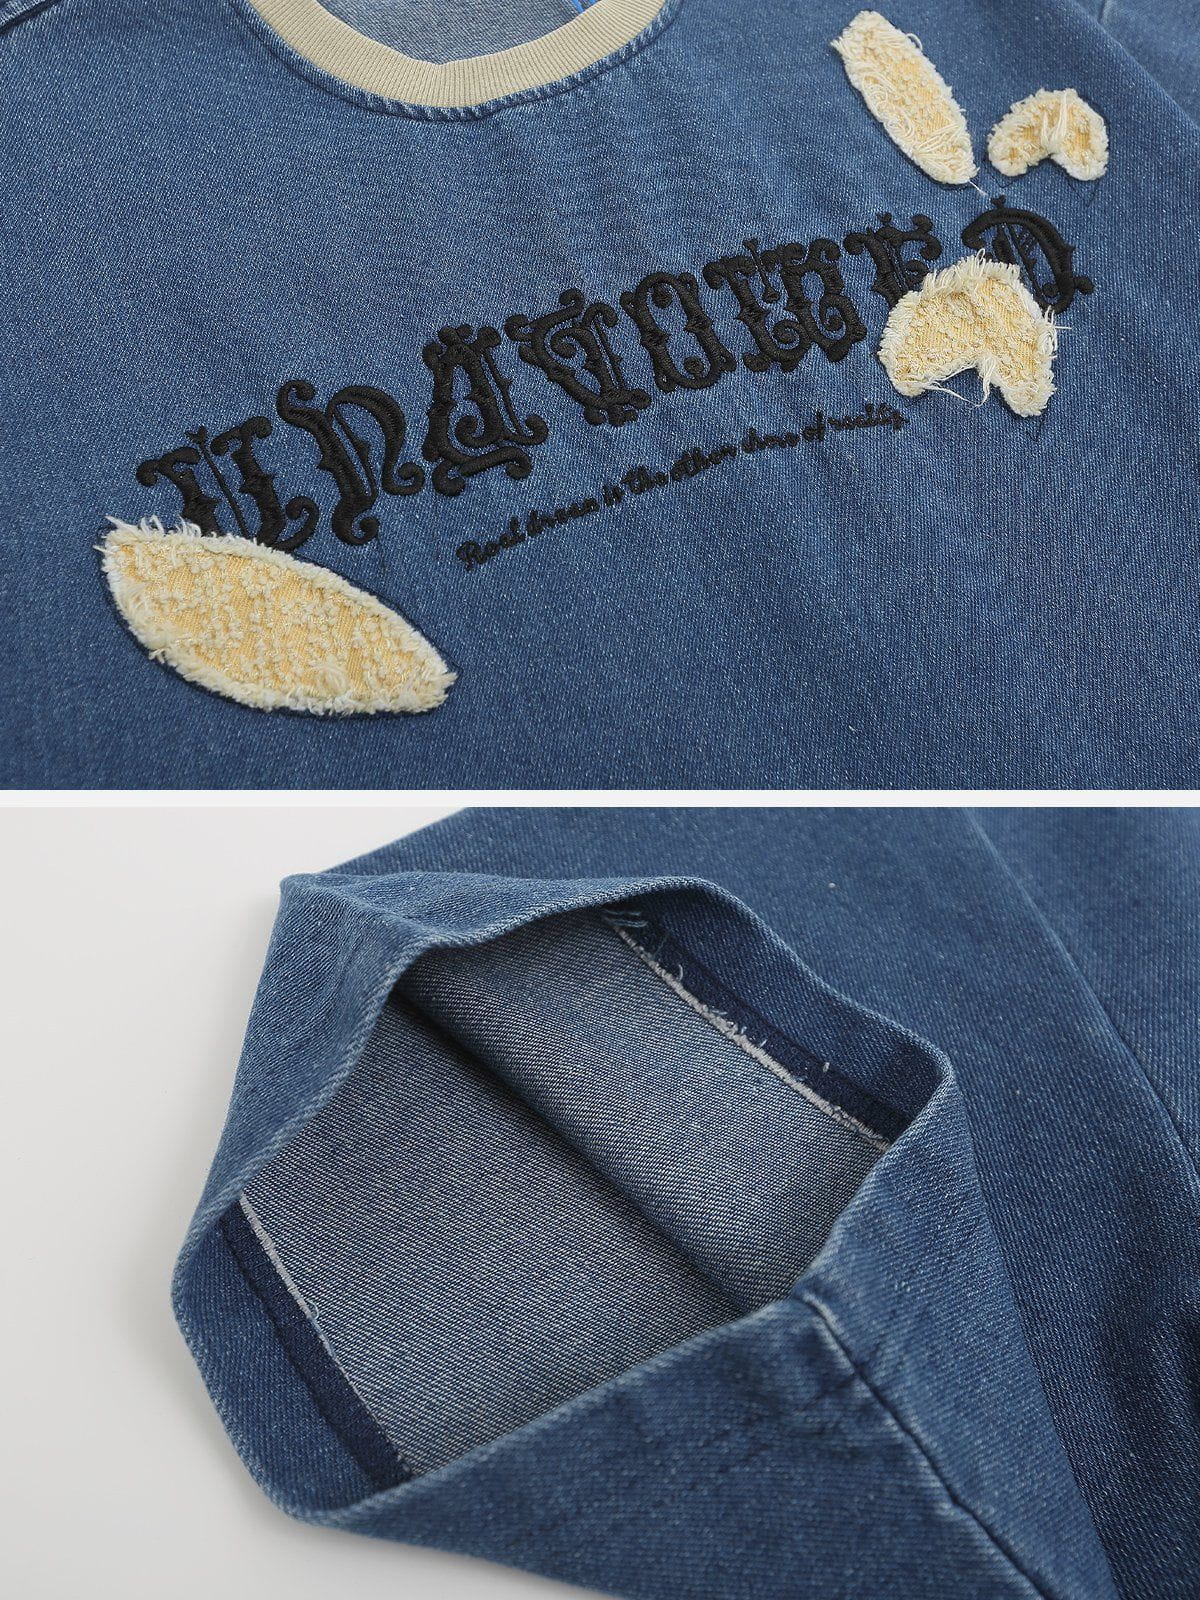 Sneakerland™ - Letter Embroidery Denim Tee